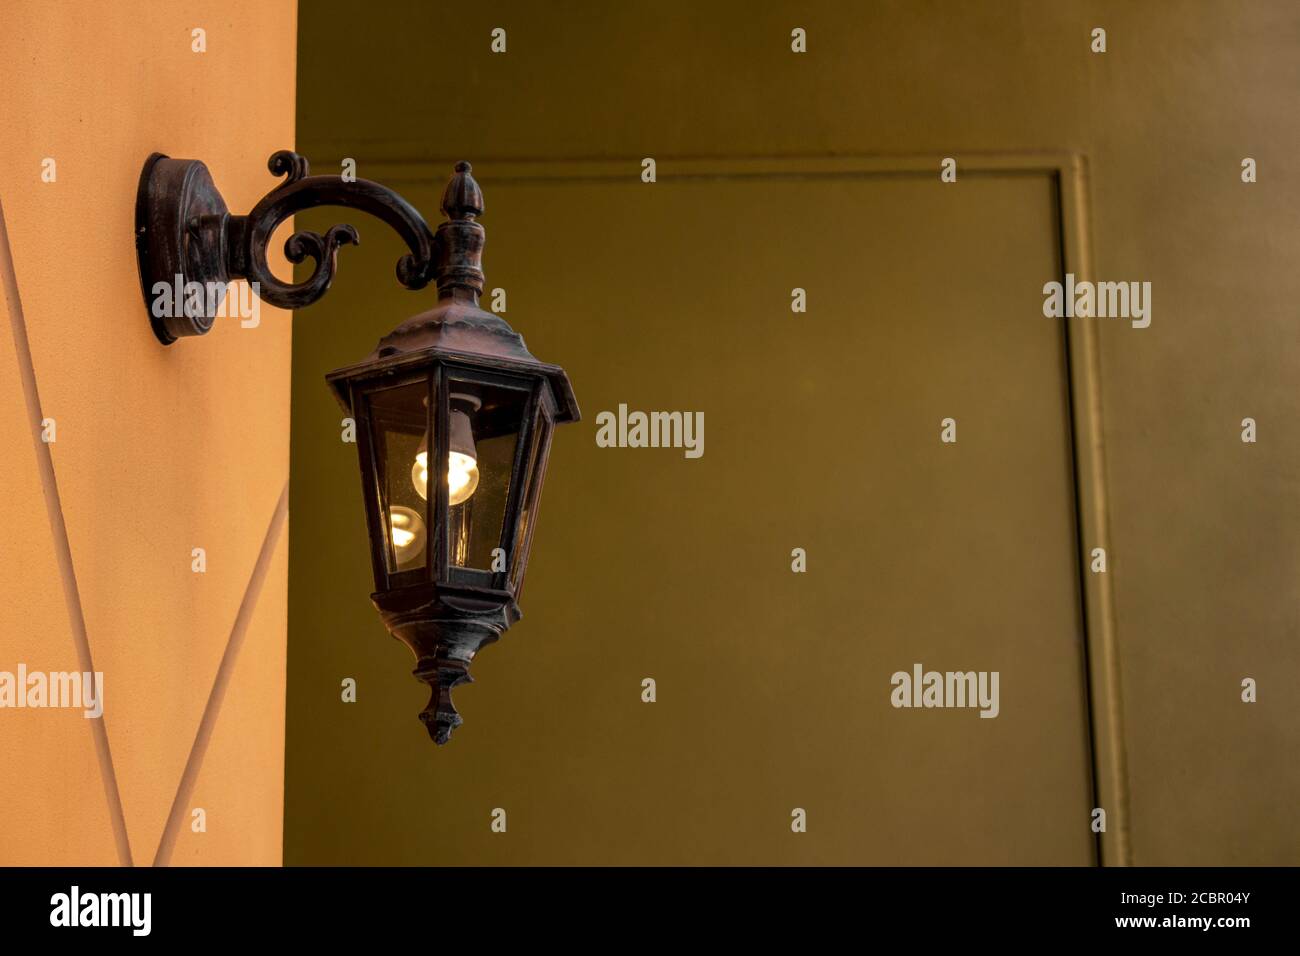 Antique style outdoor light on the exterior wall in Southern European colors Stock Photo